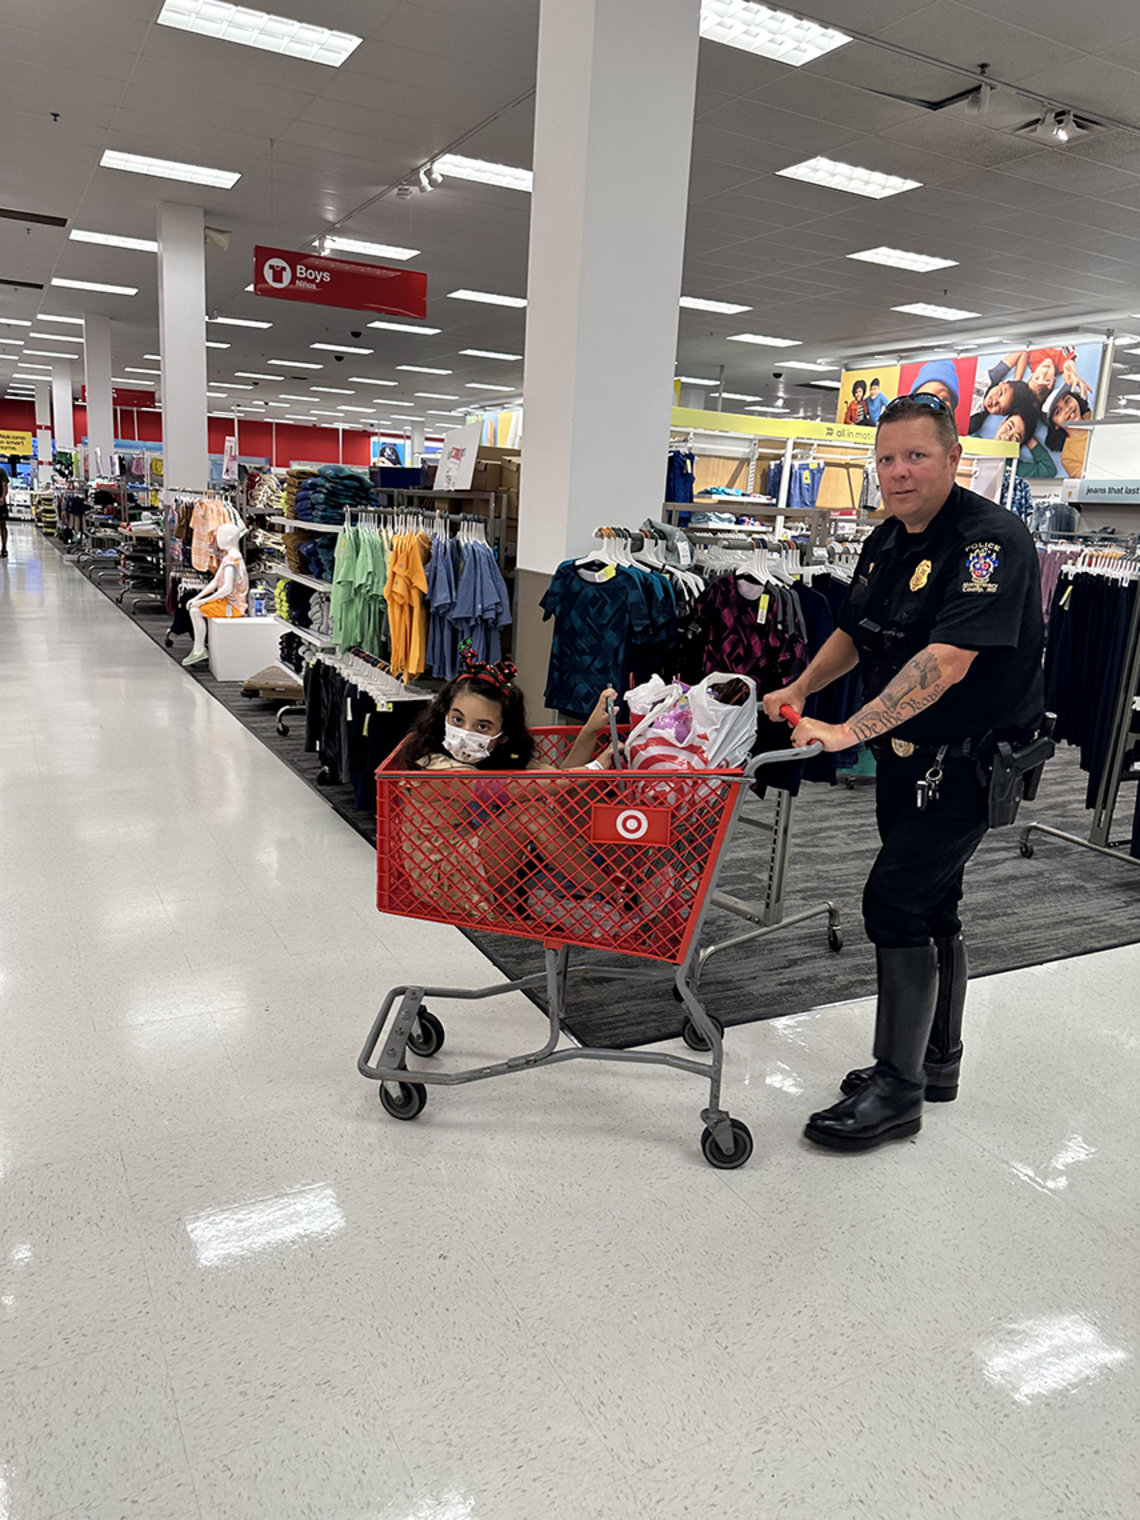 An officer pushes a resident in a grocery cart